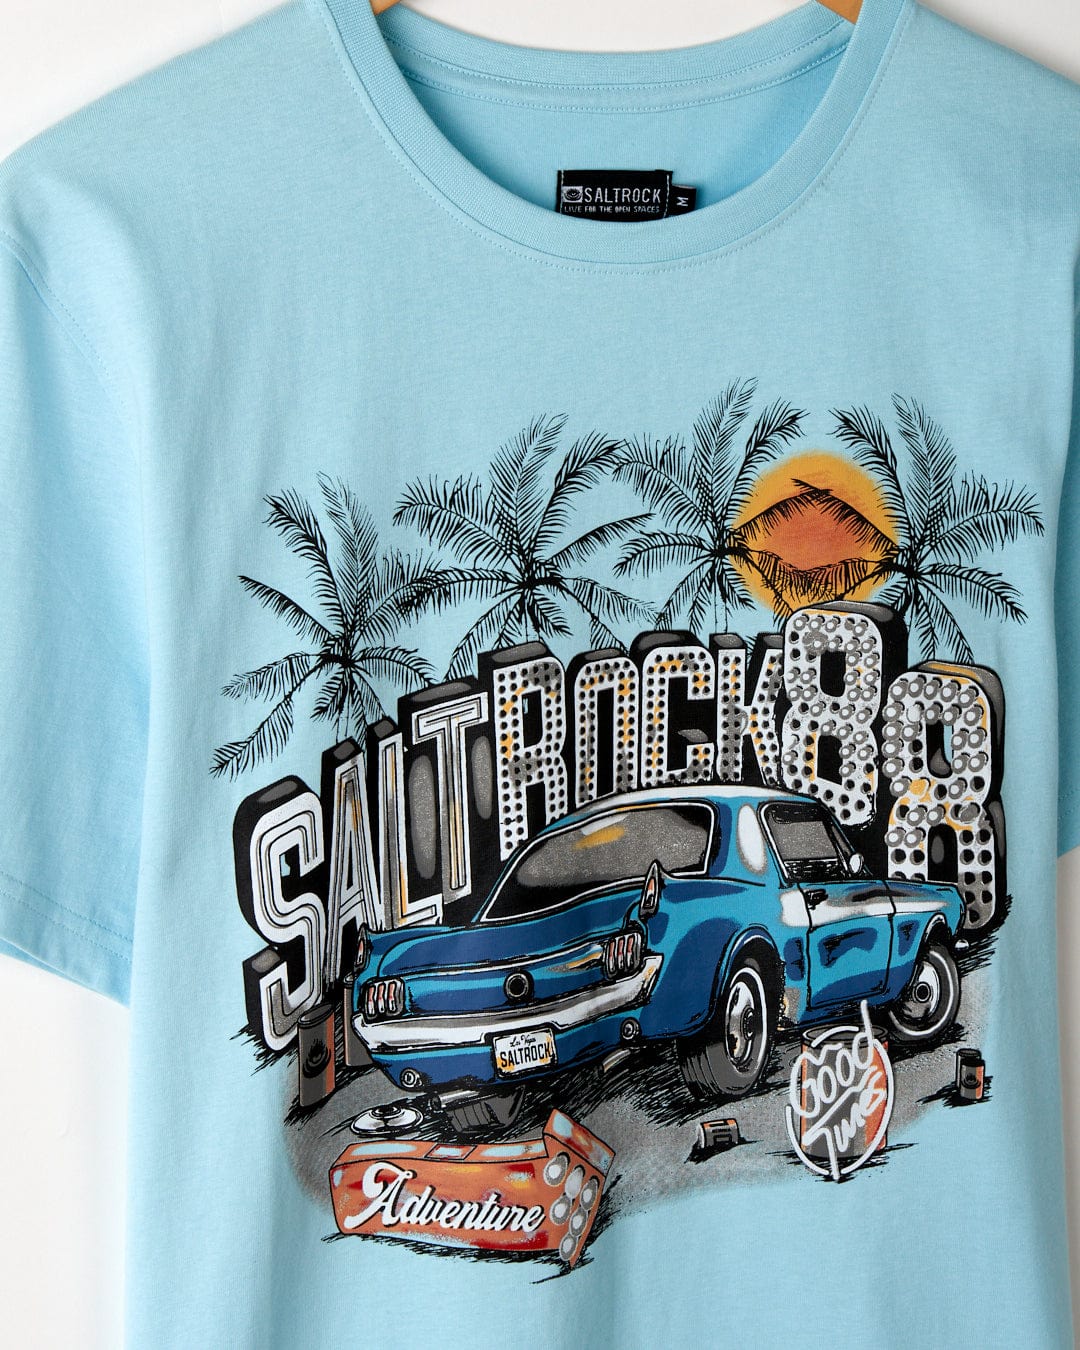 A soft peached fabric blue Neon Boneyard - Mens Short Sleeve T-Shirt featuring a graphic print with a vintage car, palm trees, sunset, and the text 